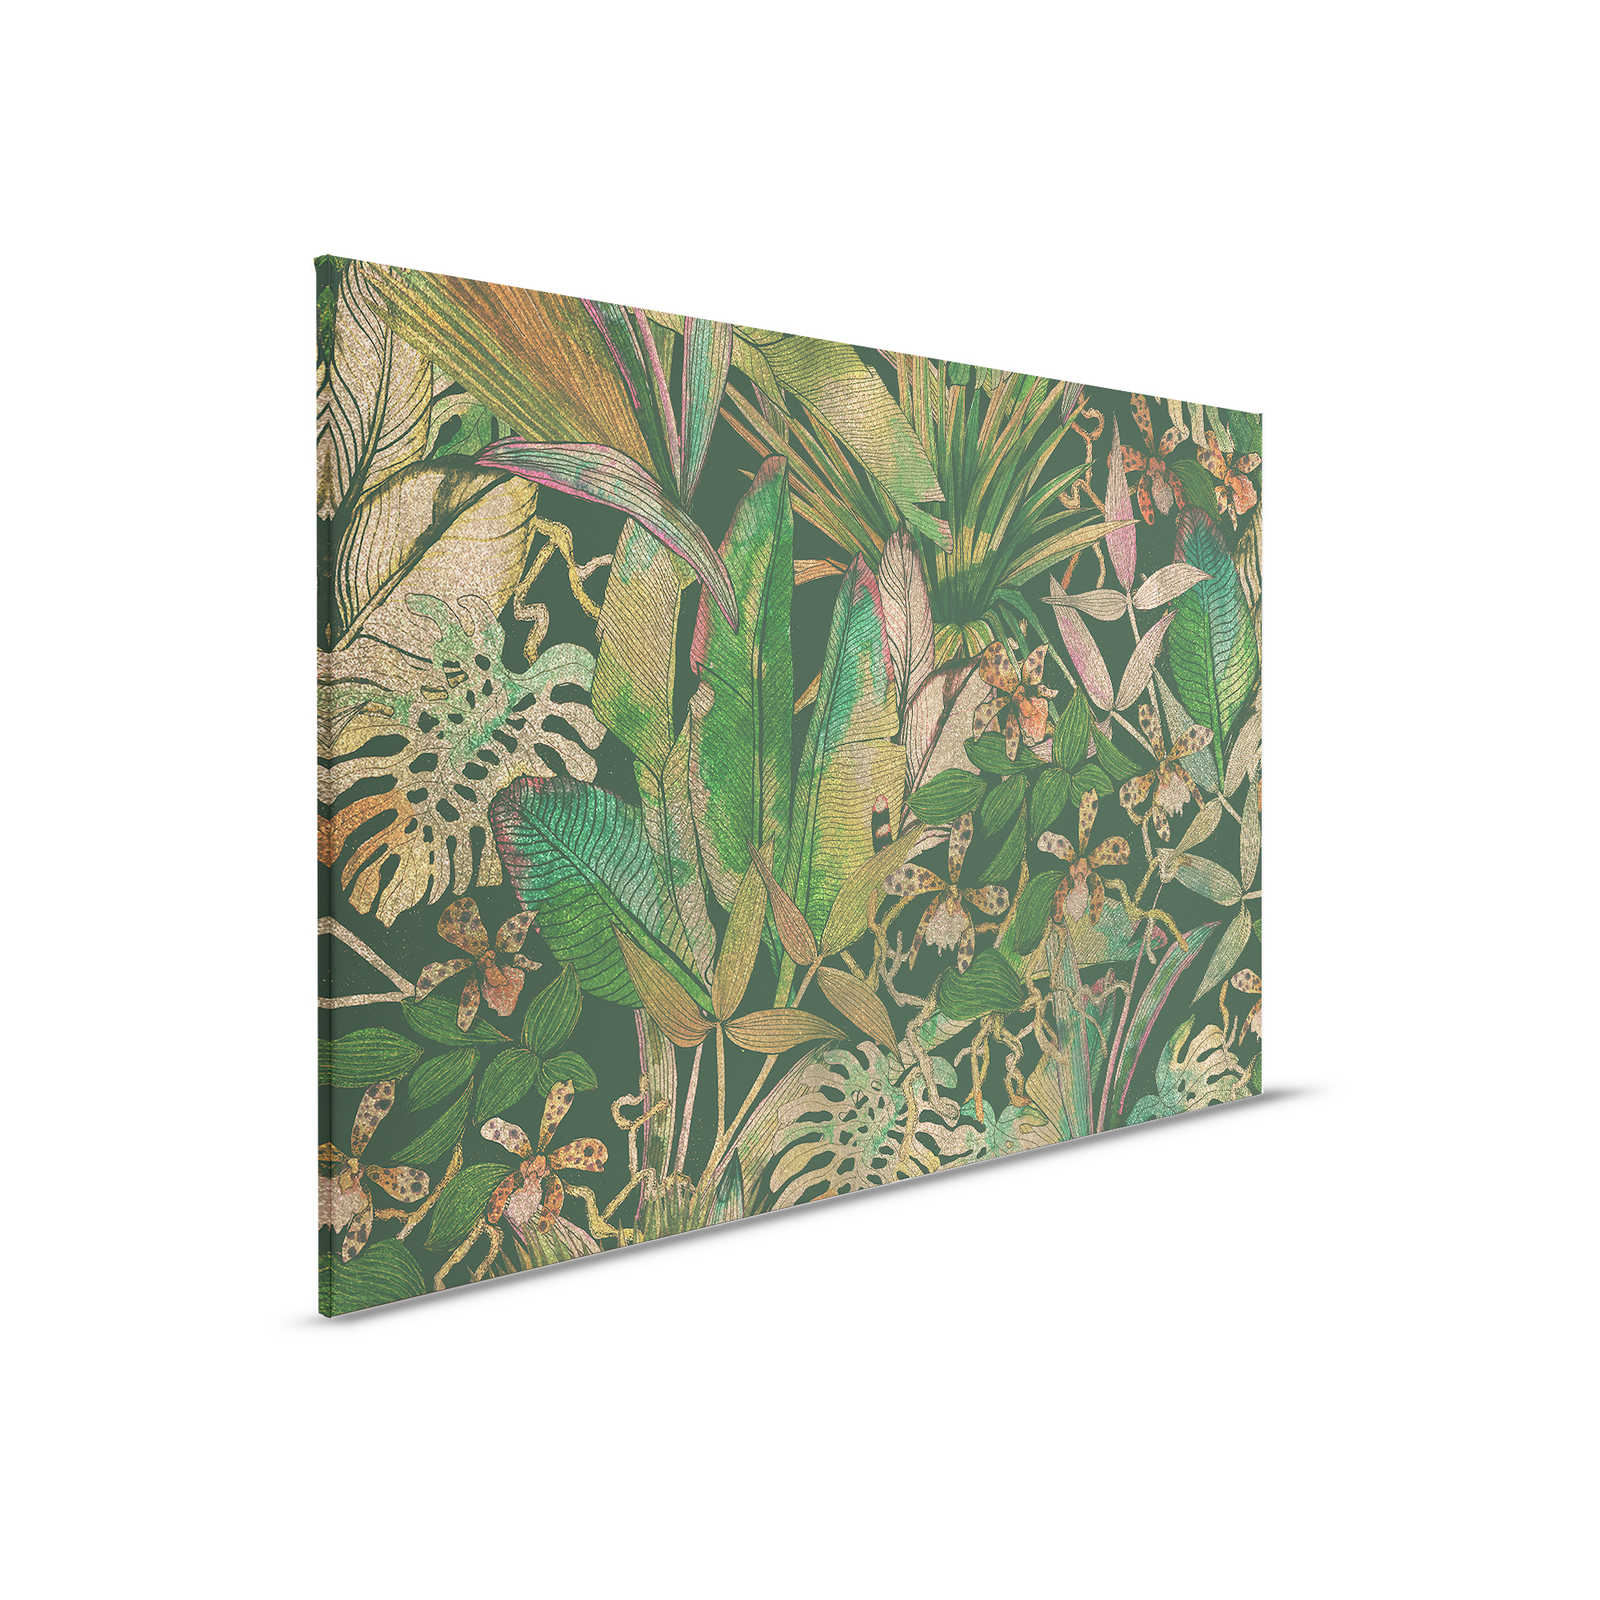 Canvas painting Jungle Motif with Leaves & Flowers - 0.90 m x 0.60 m
